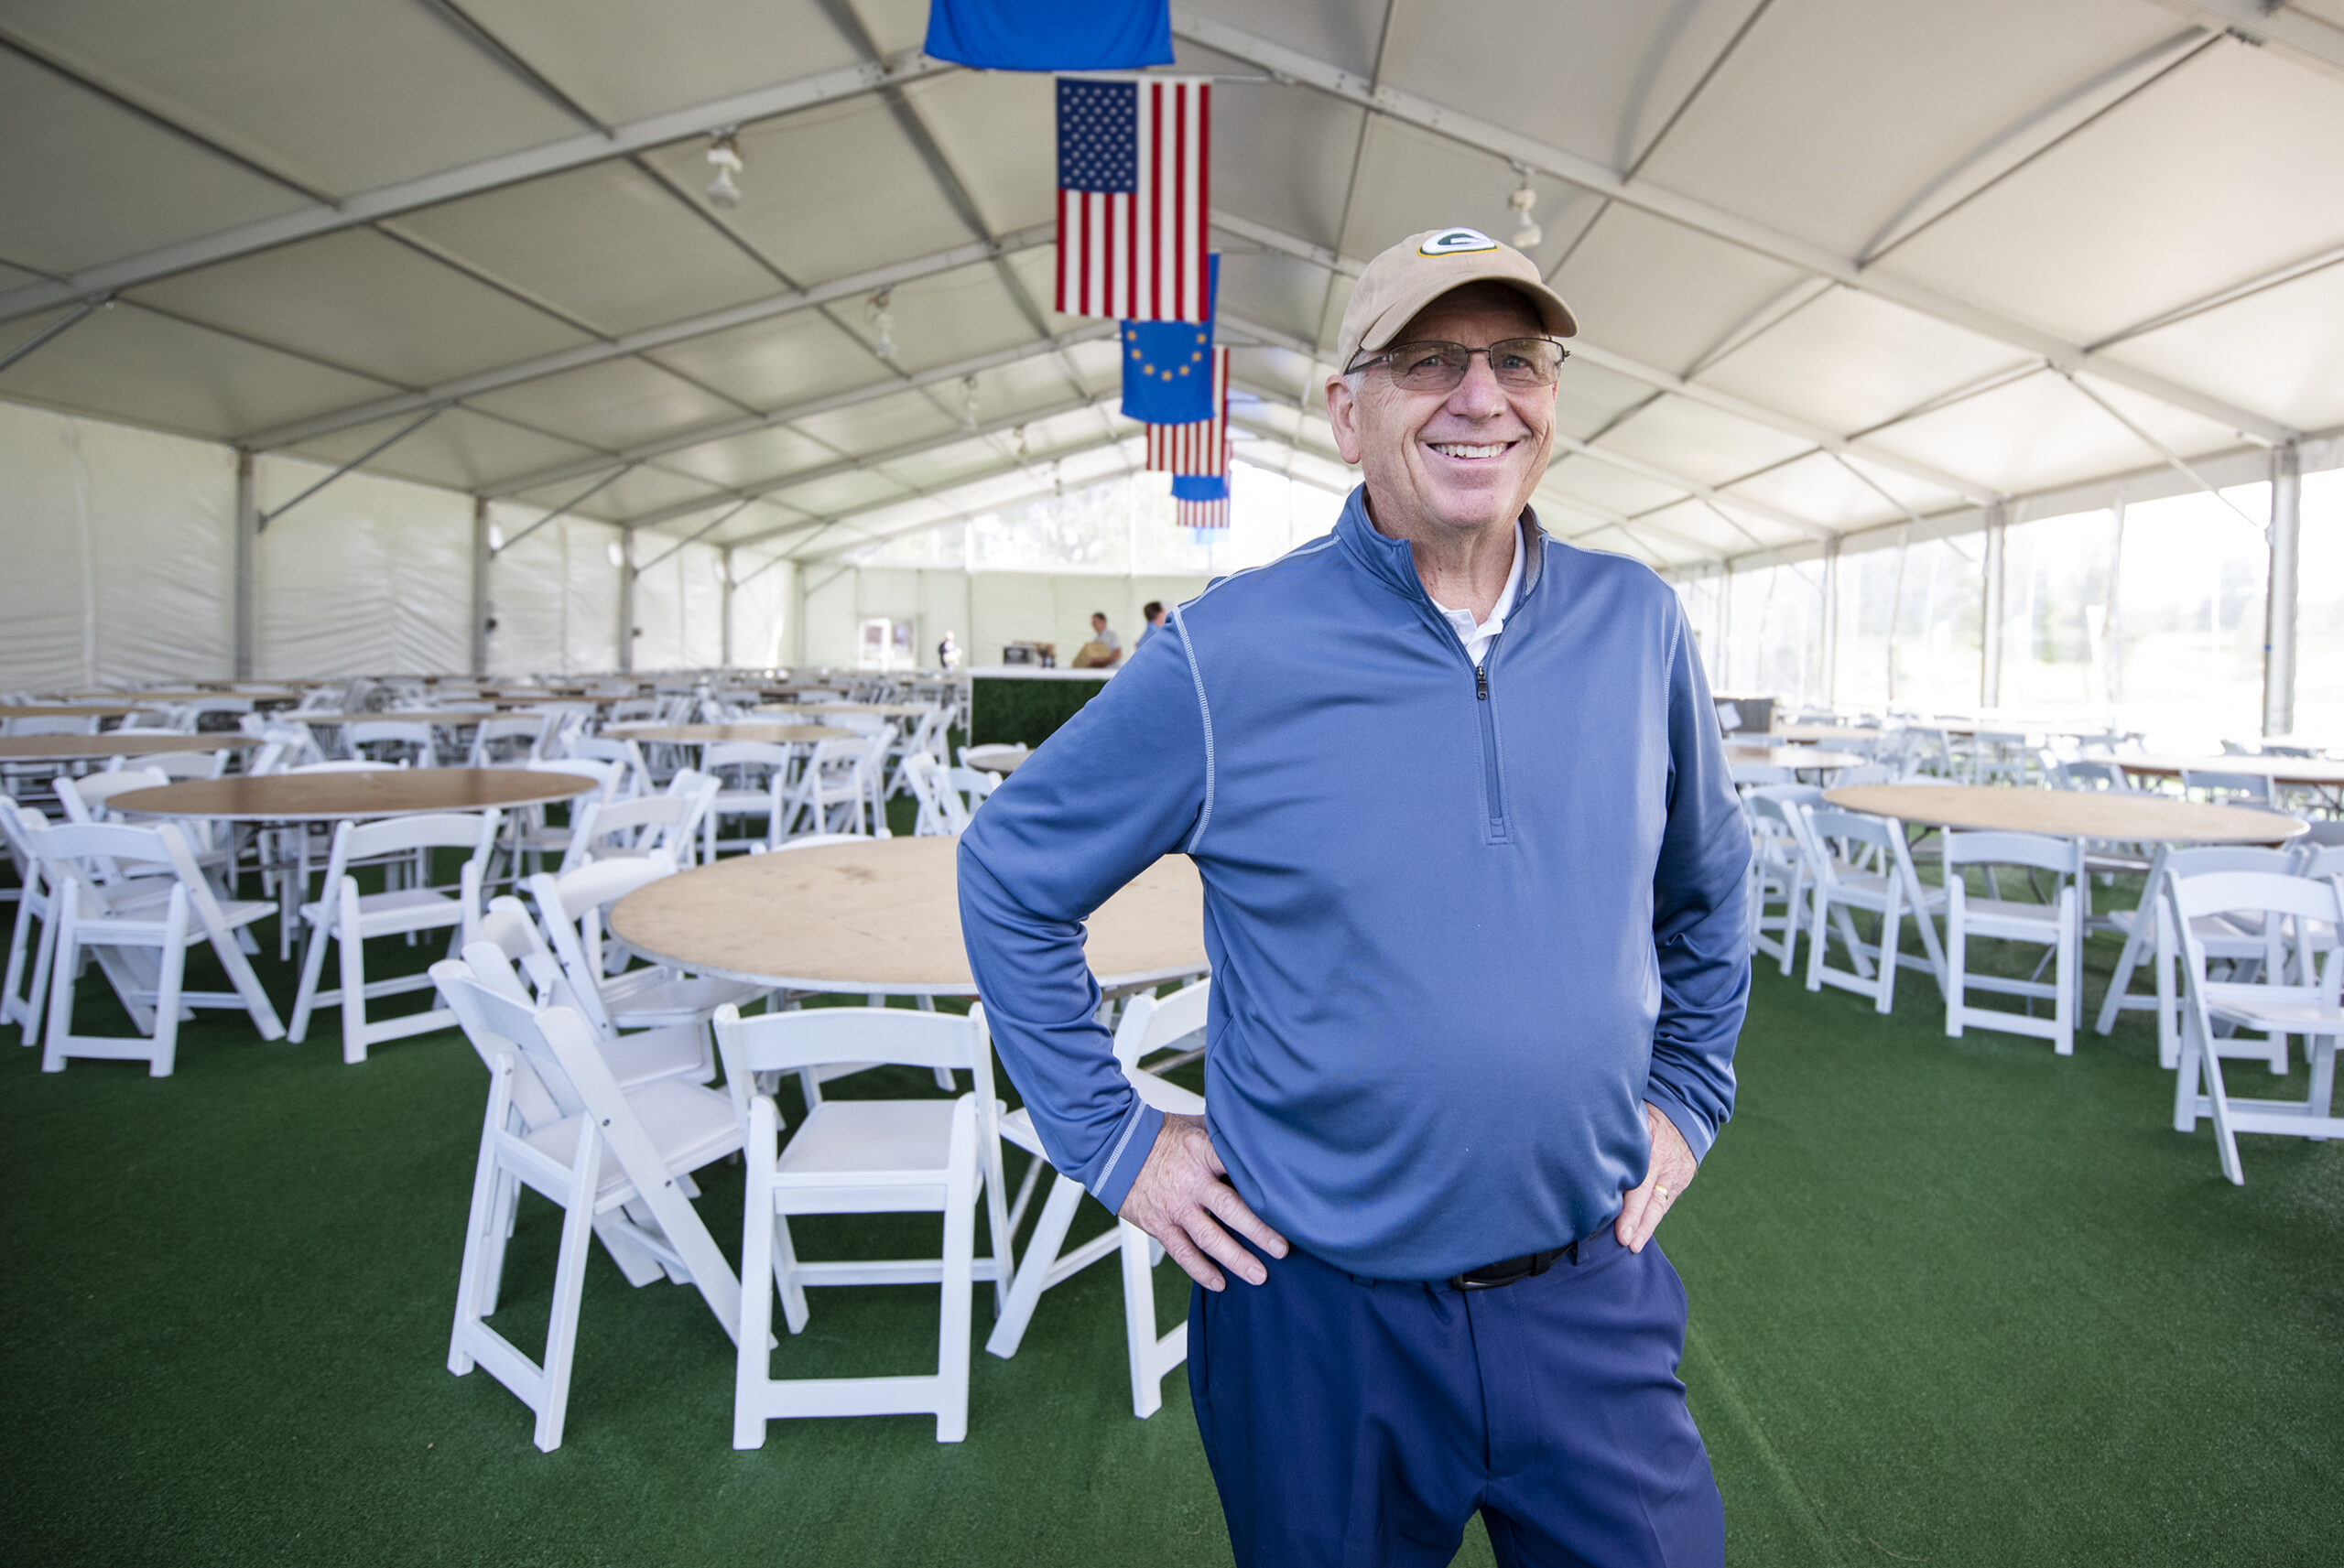 A man stands inside of a large tent with several circular dining tables inside.